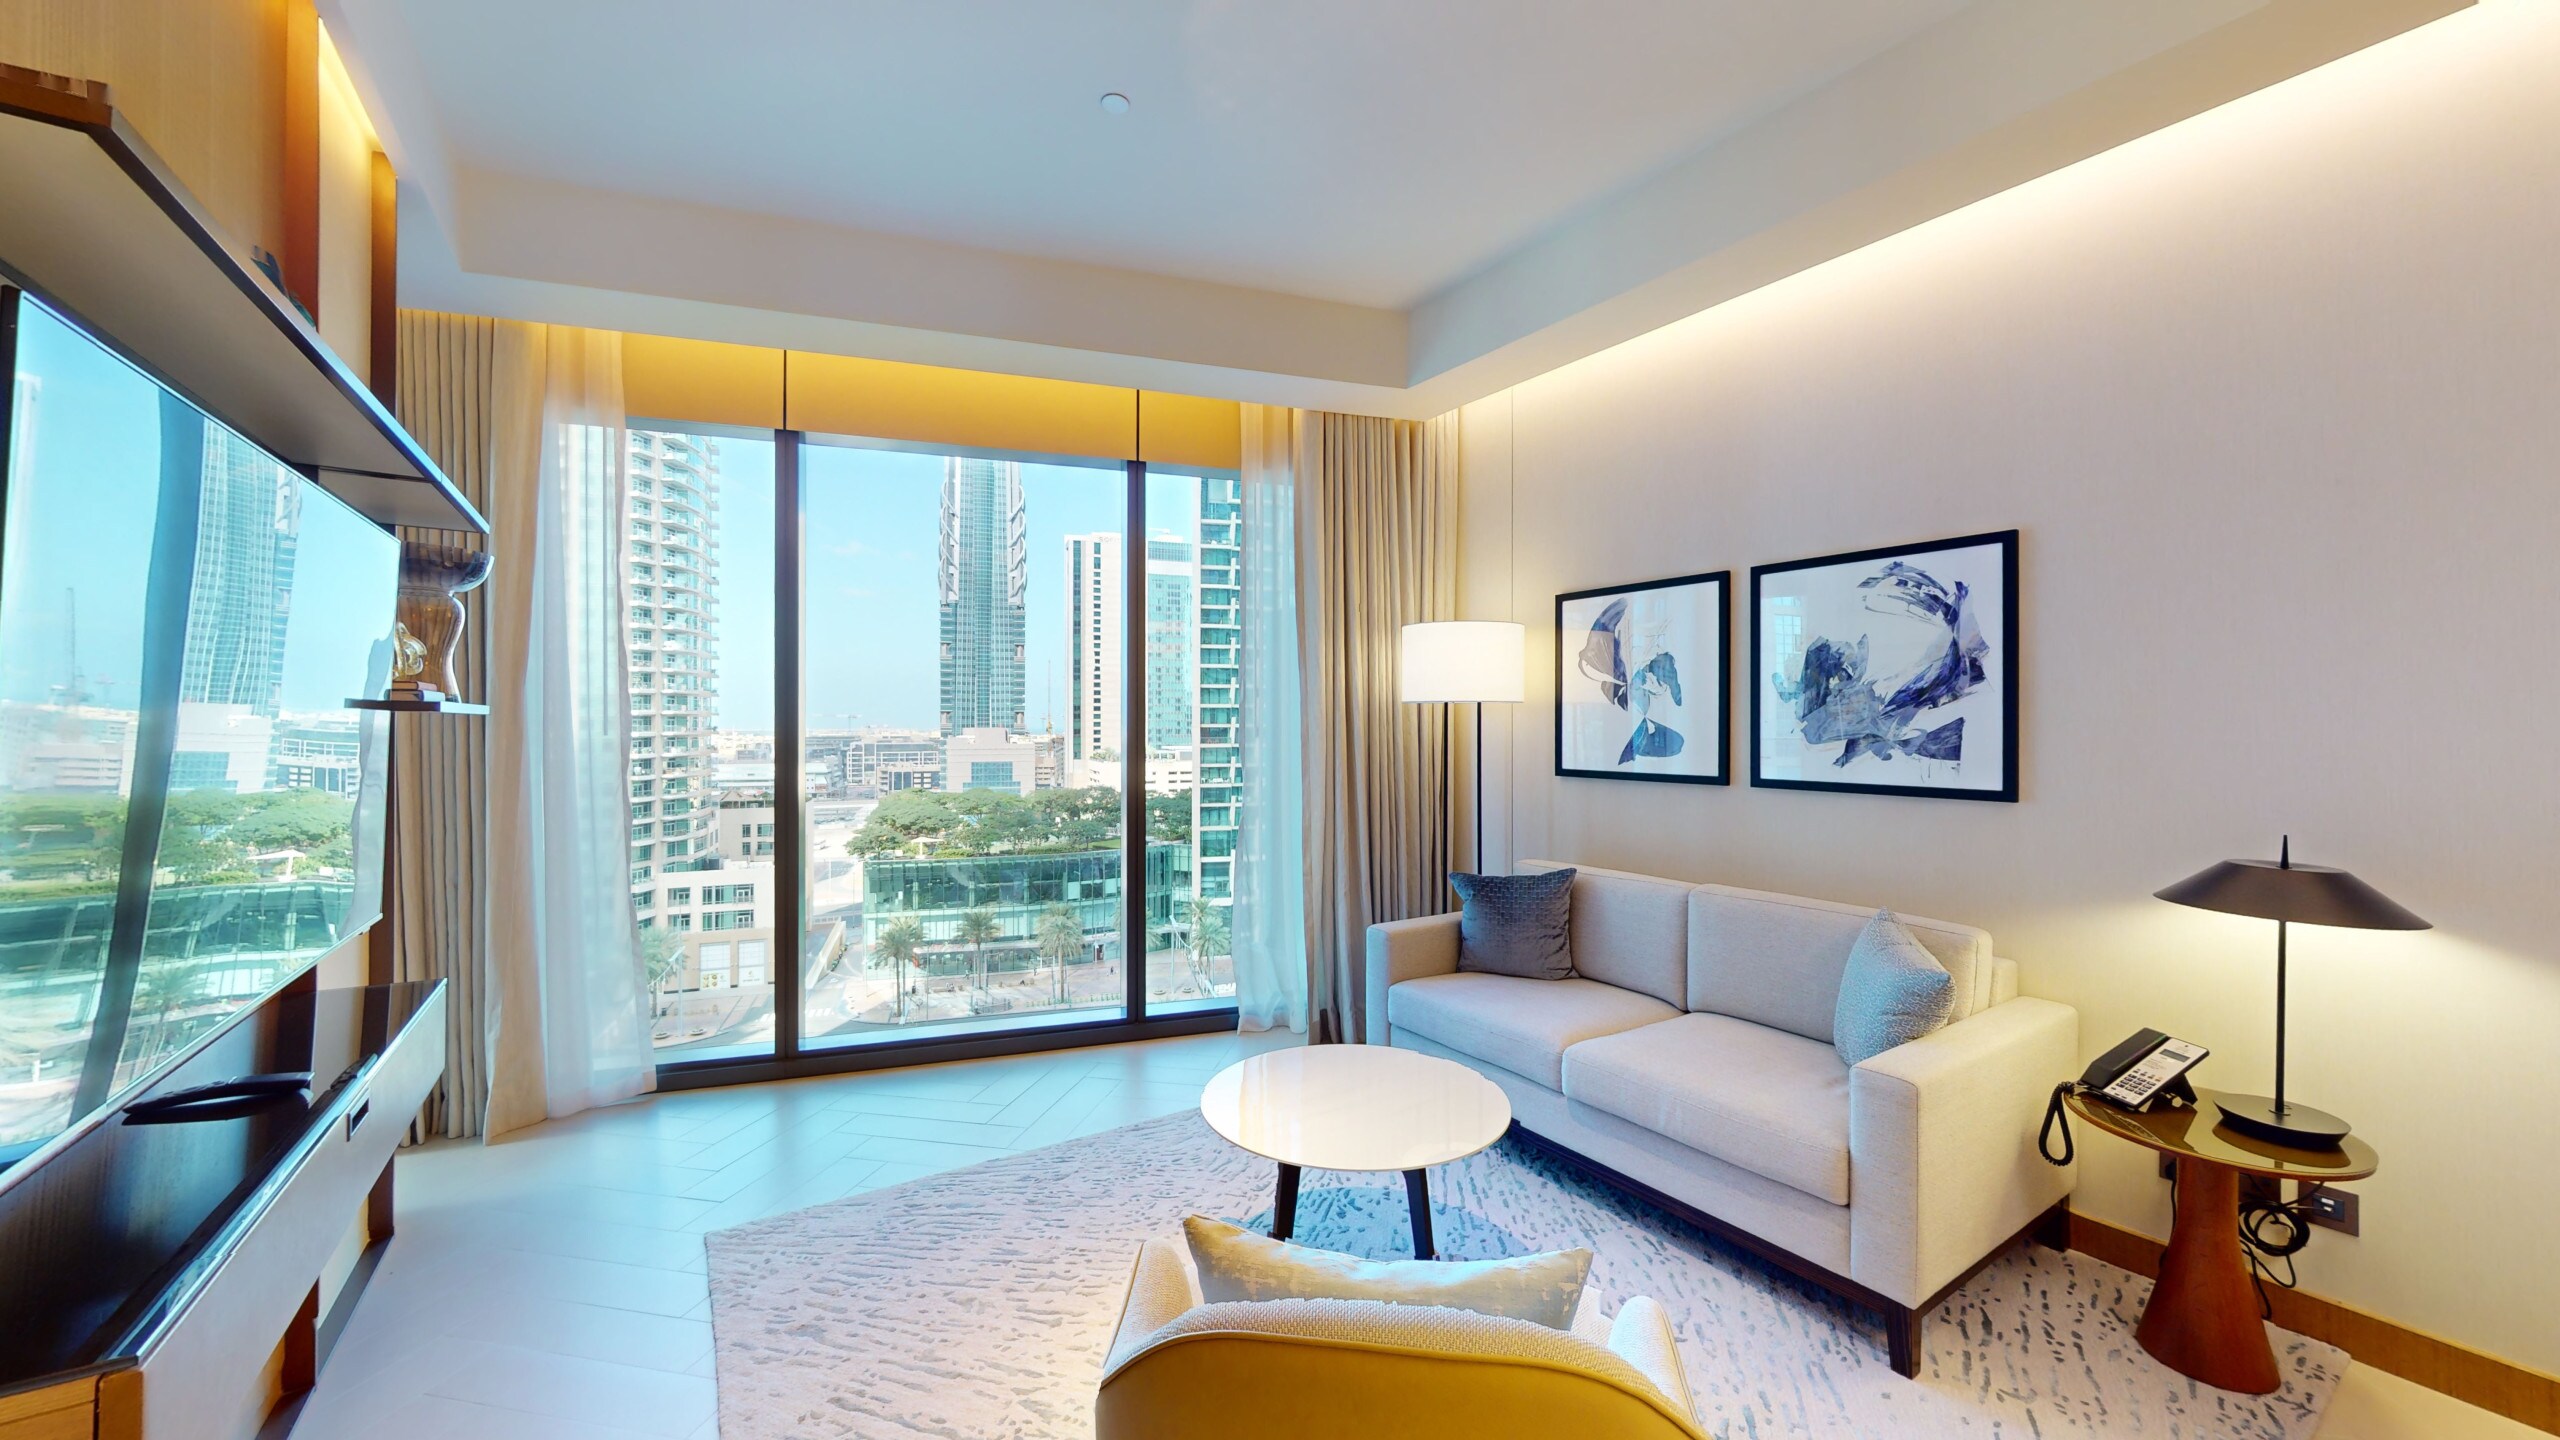 Property Image 1 - Property Manager - Address Residences Opera 2BR Downtown